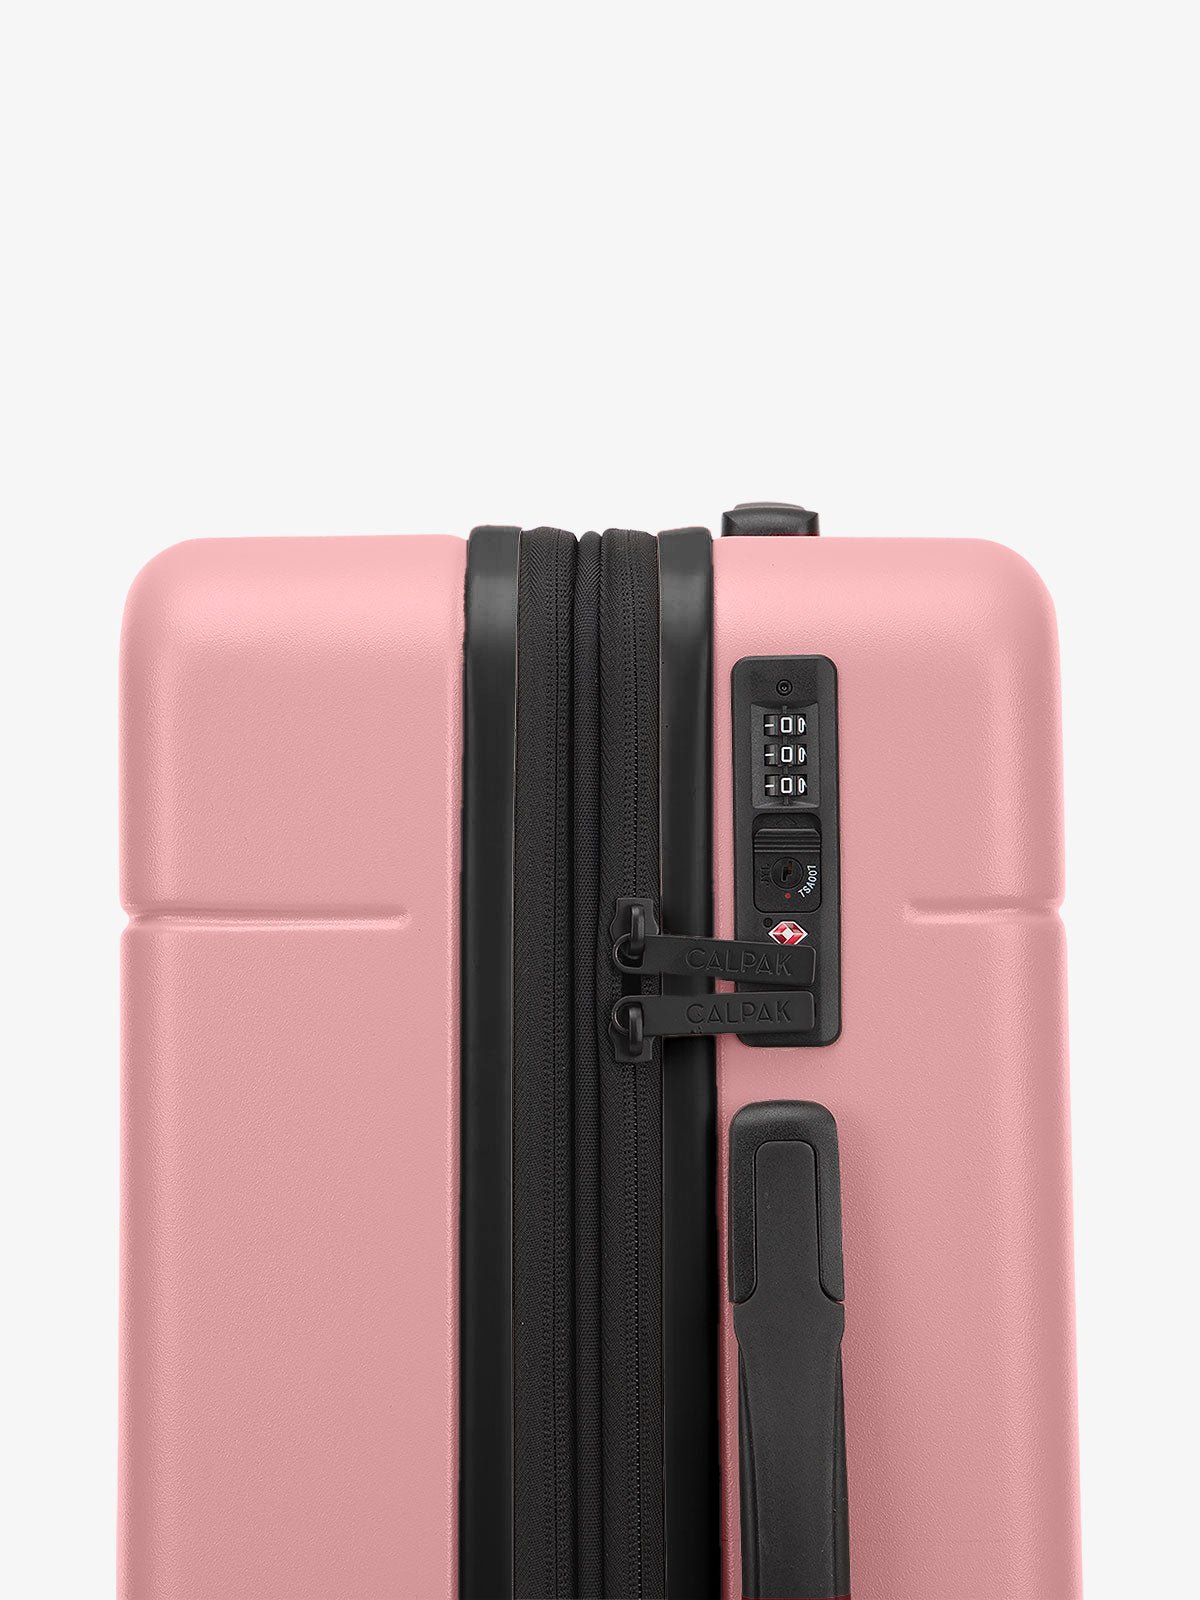 Mauve CALPAK Hue trunk luggage with built in TSA approved lock